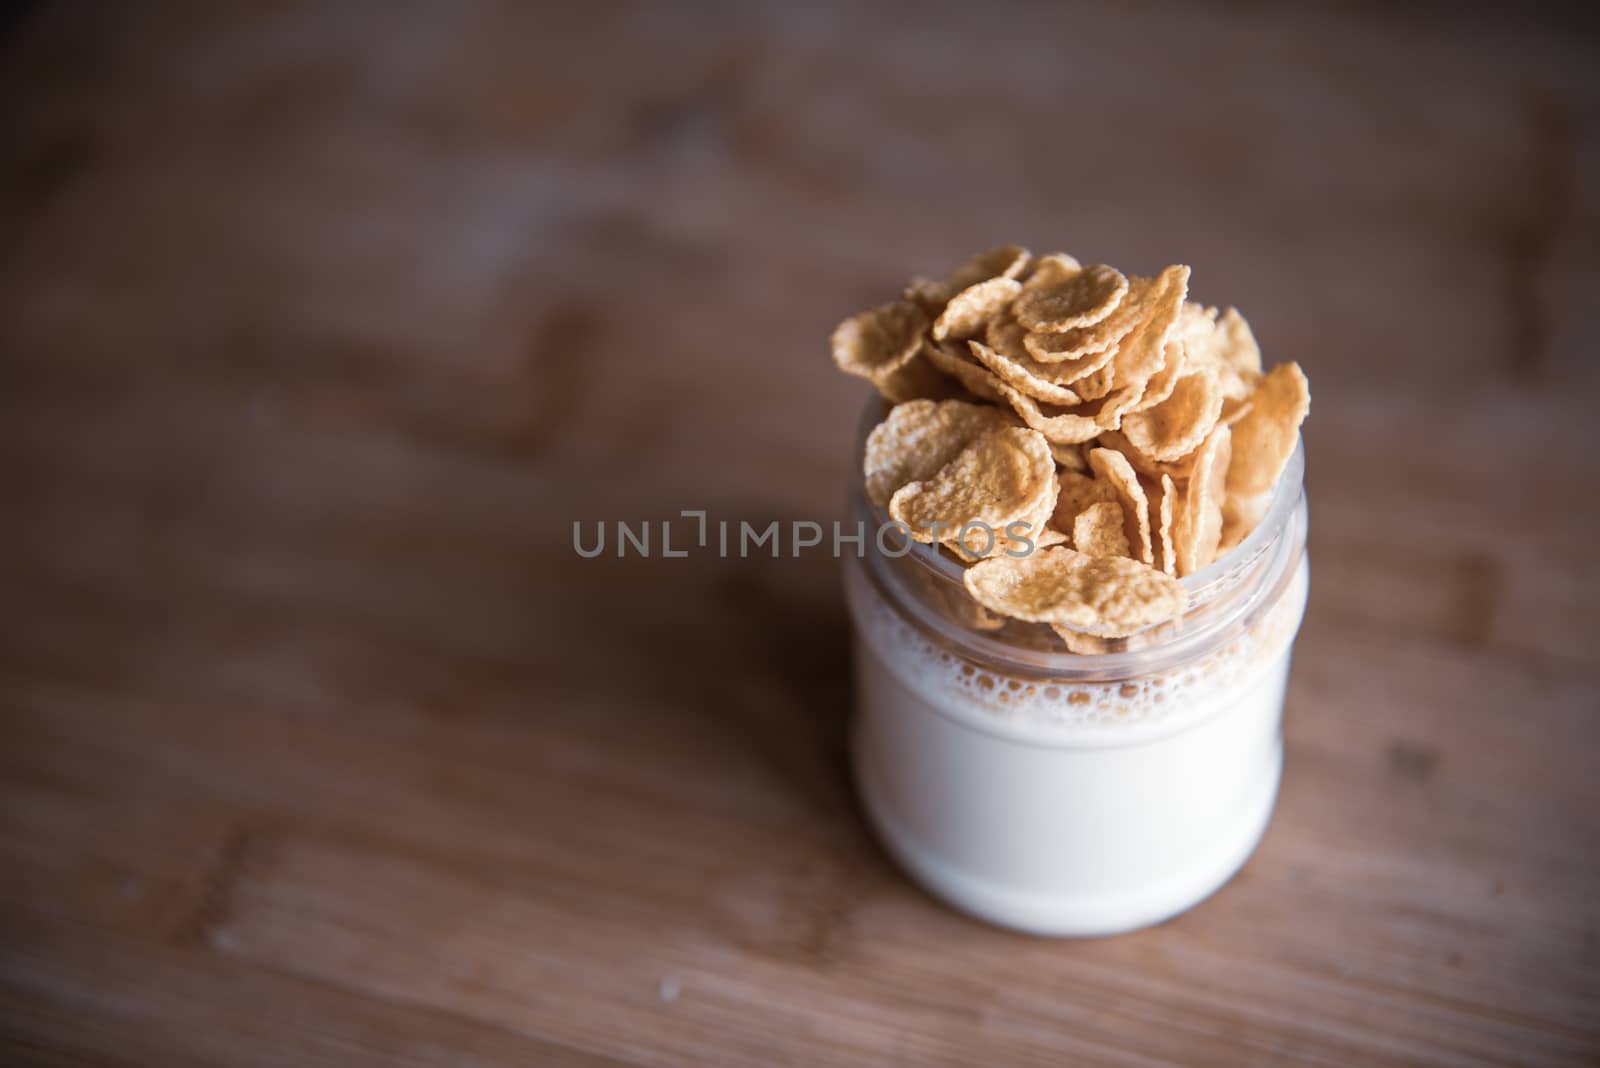 jar of yogurt with cornflakes stands on a wooden board and place for copy space